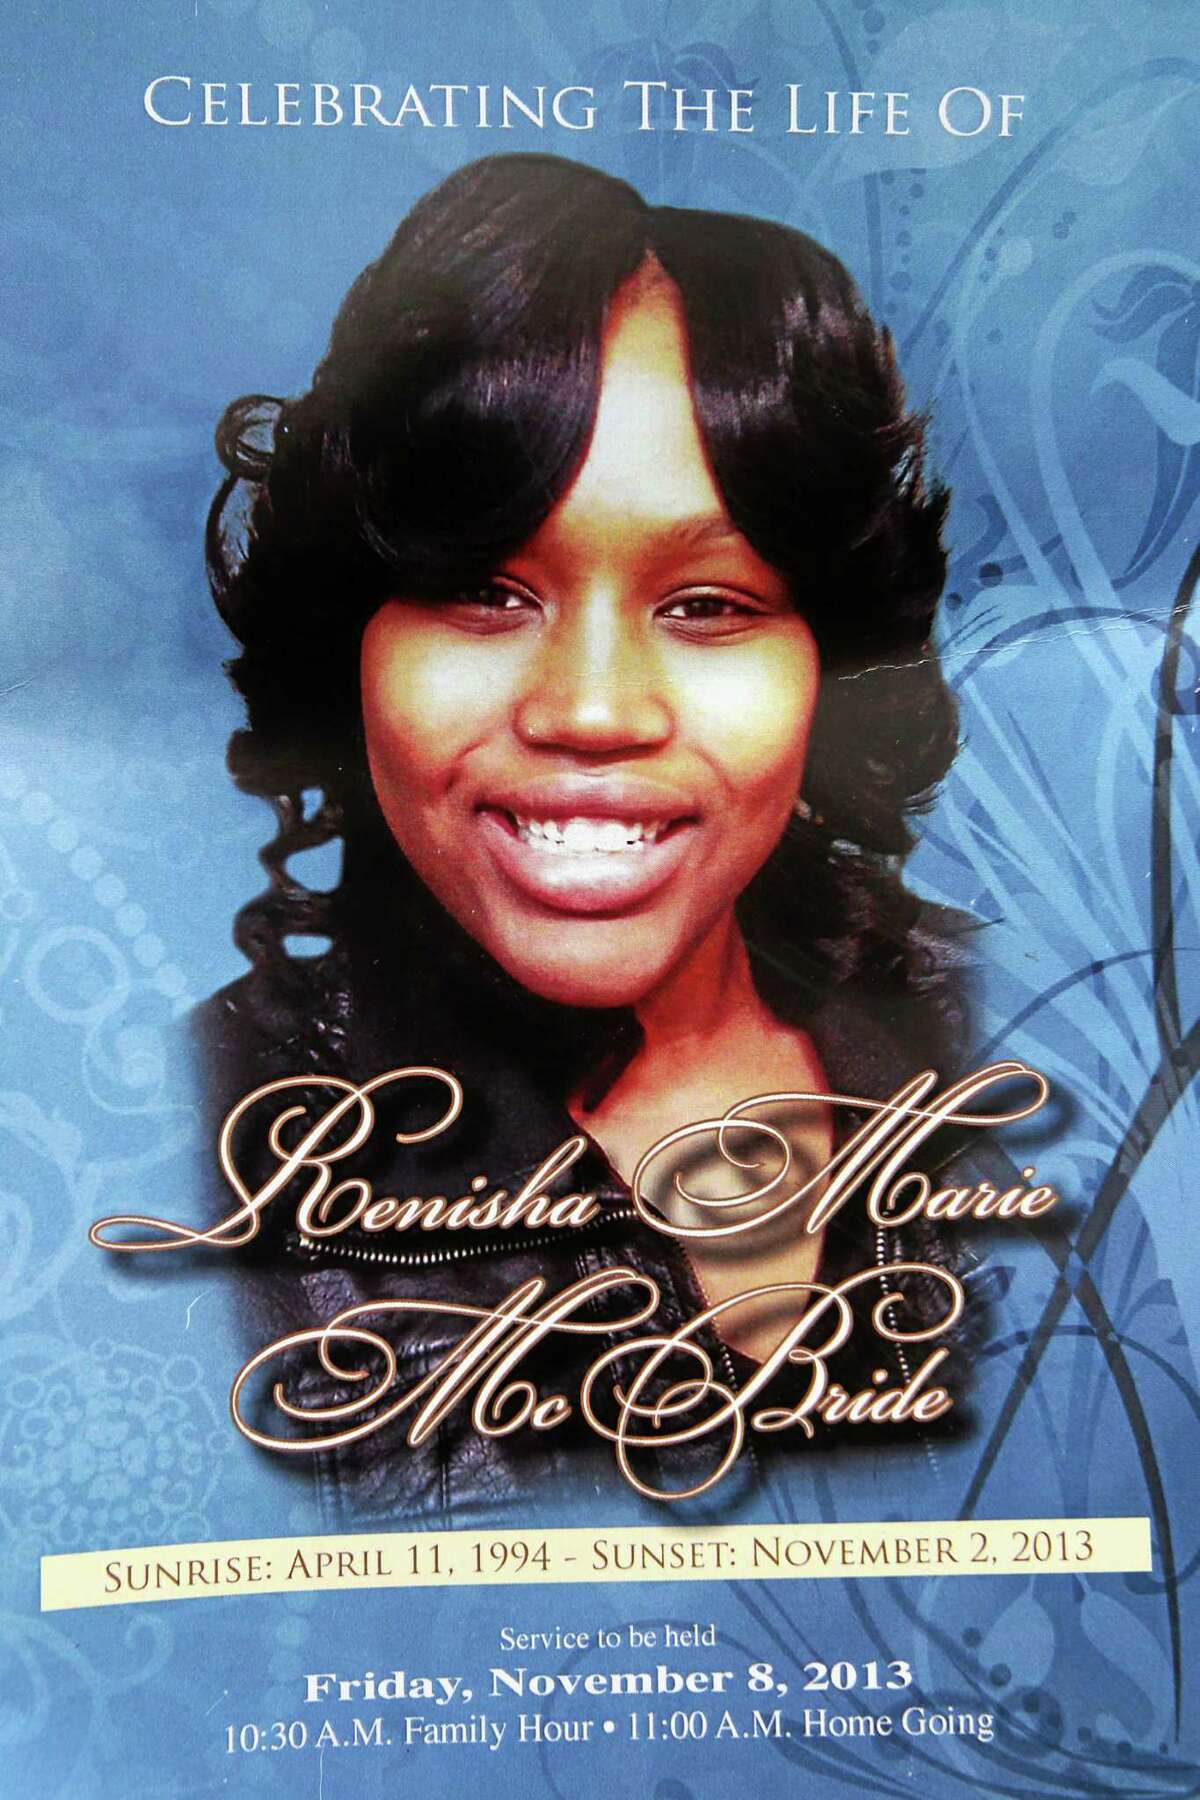 In this Nov. 8, 2013 file photo is the front cover of a funeral program for 19-year-old Renisha McBride from a service at House of Prayer & Praise Cathedral in Detroit. Prosecutors announced Thursday, Nov. 14, 2013 that they have scheduled a news conference Friday in Detroit to announce whether they'll charge a suburban Detroit homeowner in the shooting death of McBride. (AP Photo/Detroit Free Press, Brian Kaufman) DETROIT NEWS OUT; NO SALES;